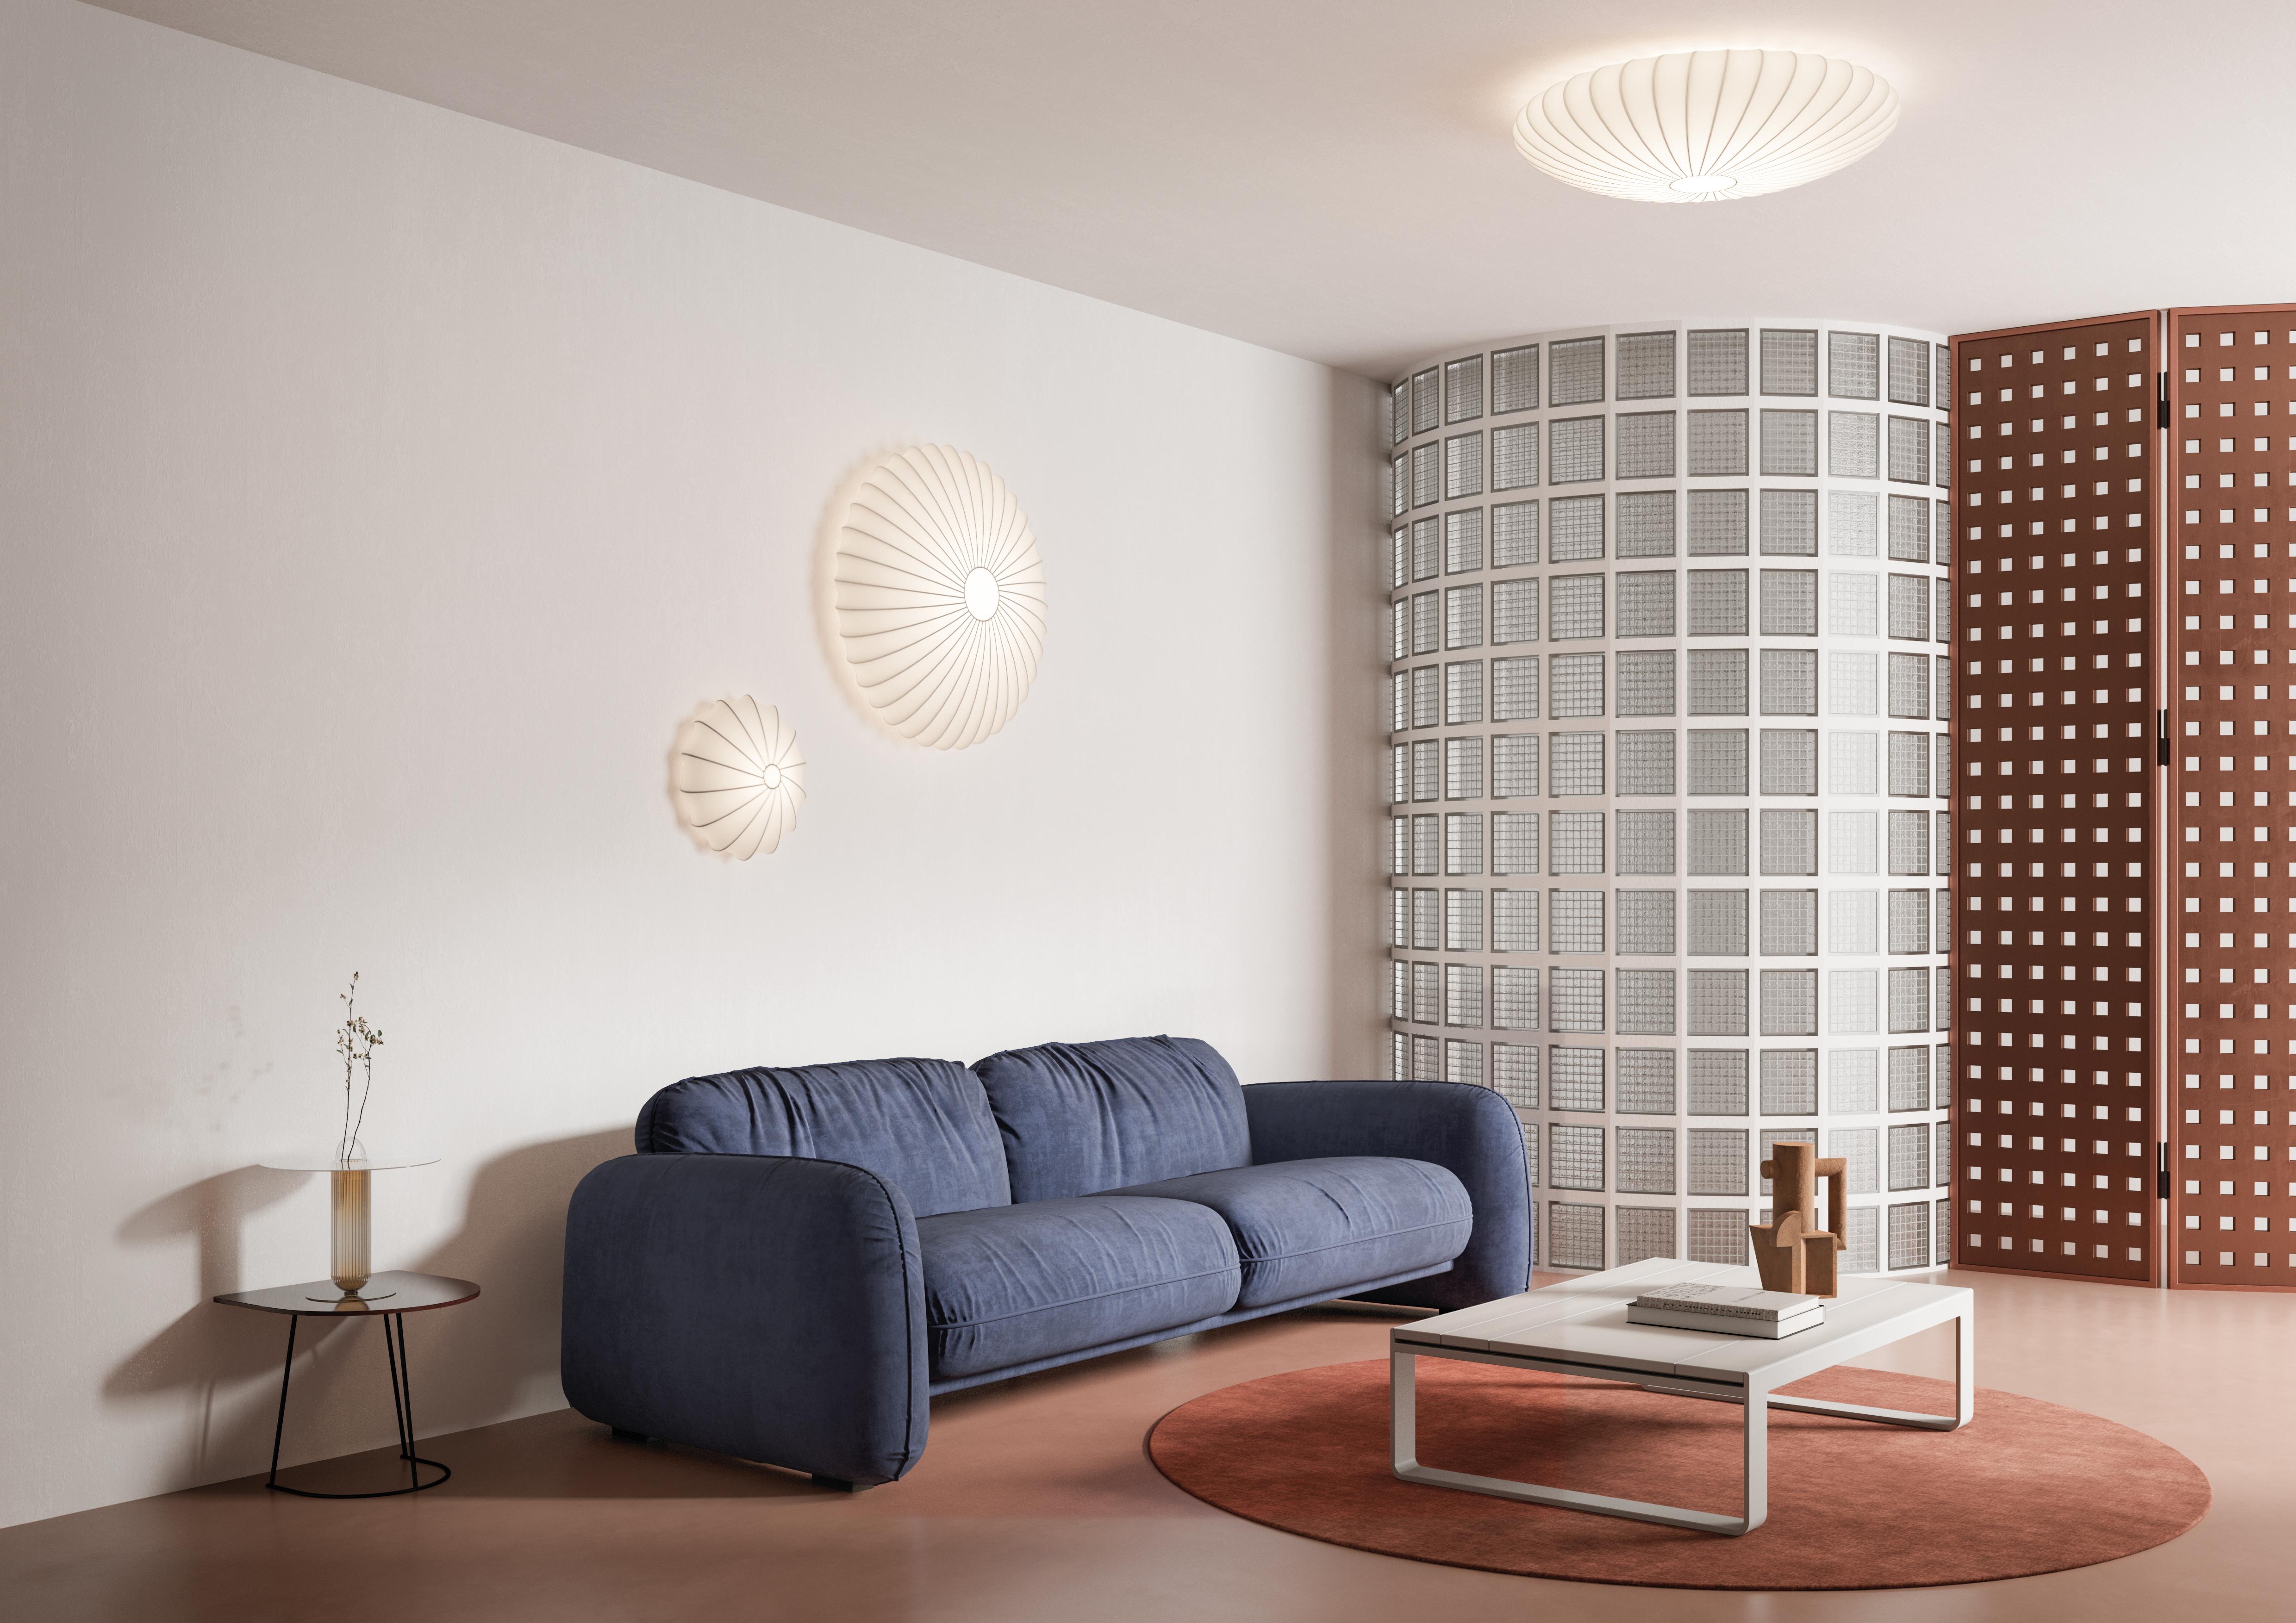 Axolight Muse Large Ceiling Light in Sticks Pattern with White Metal Finish by Sandro Santantonio

Cheerfulness meets inspiration and together they create Muse. Energetic colours, sinuous lines, fluid fabric come together, leaving the imagination